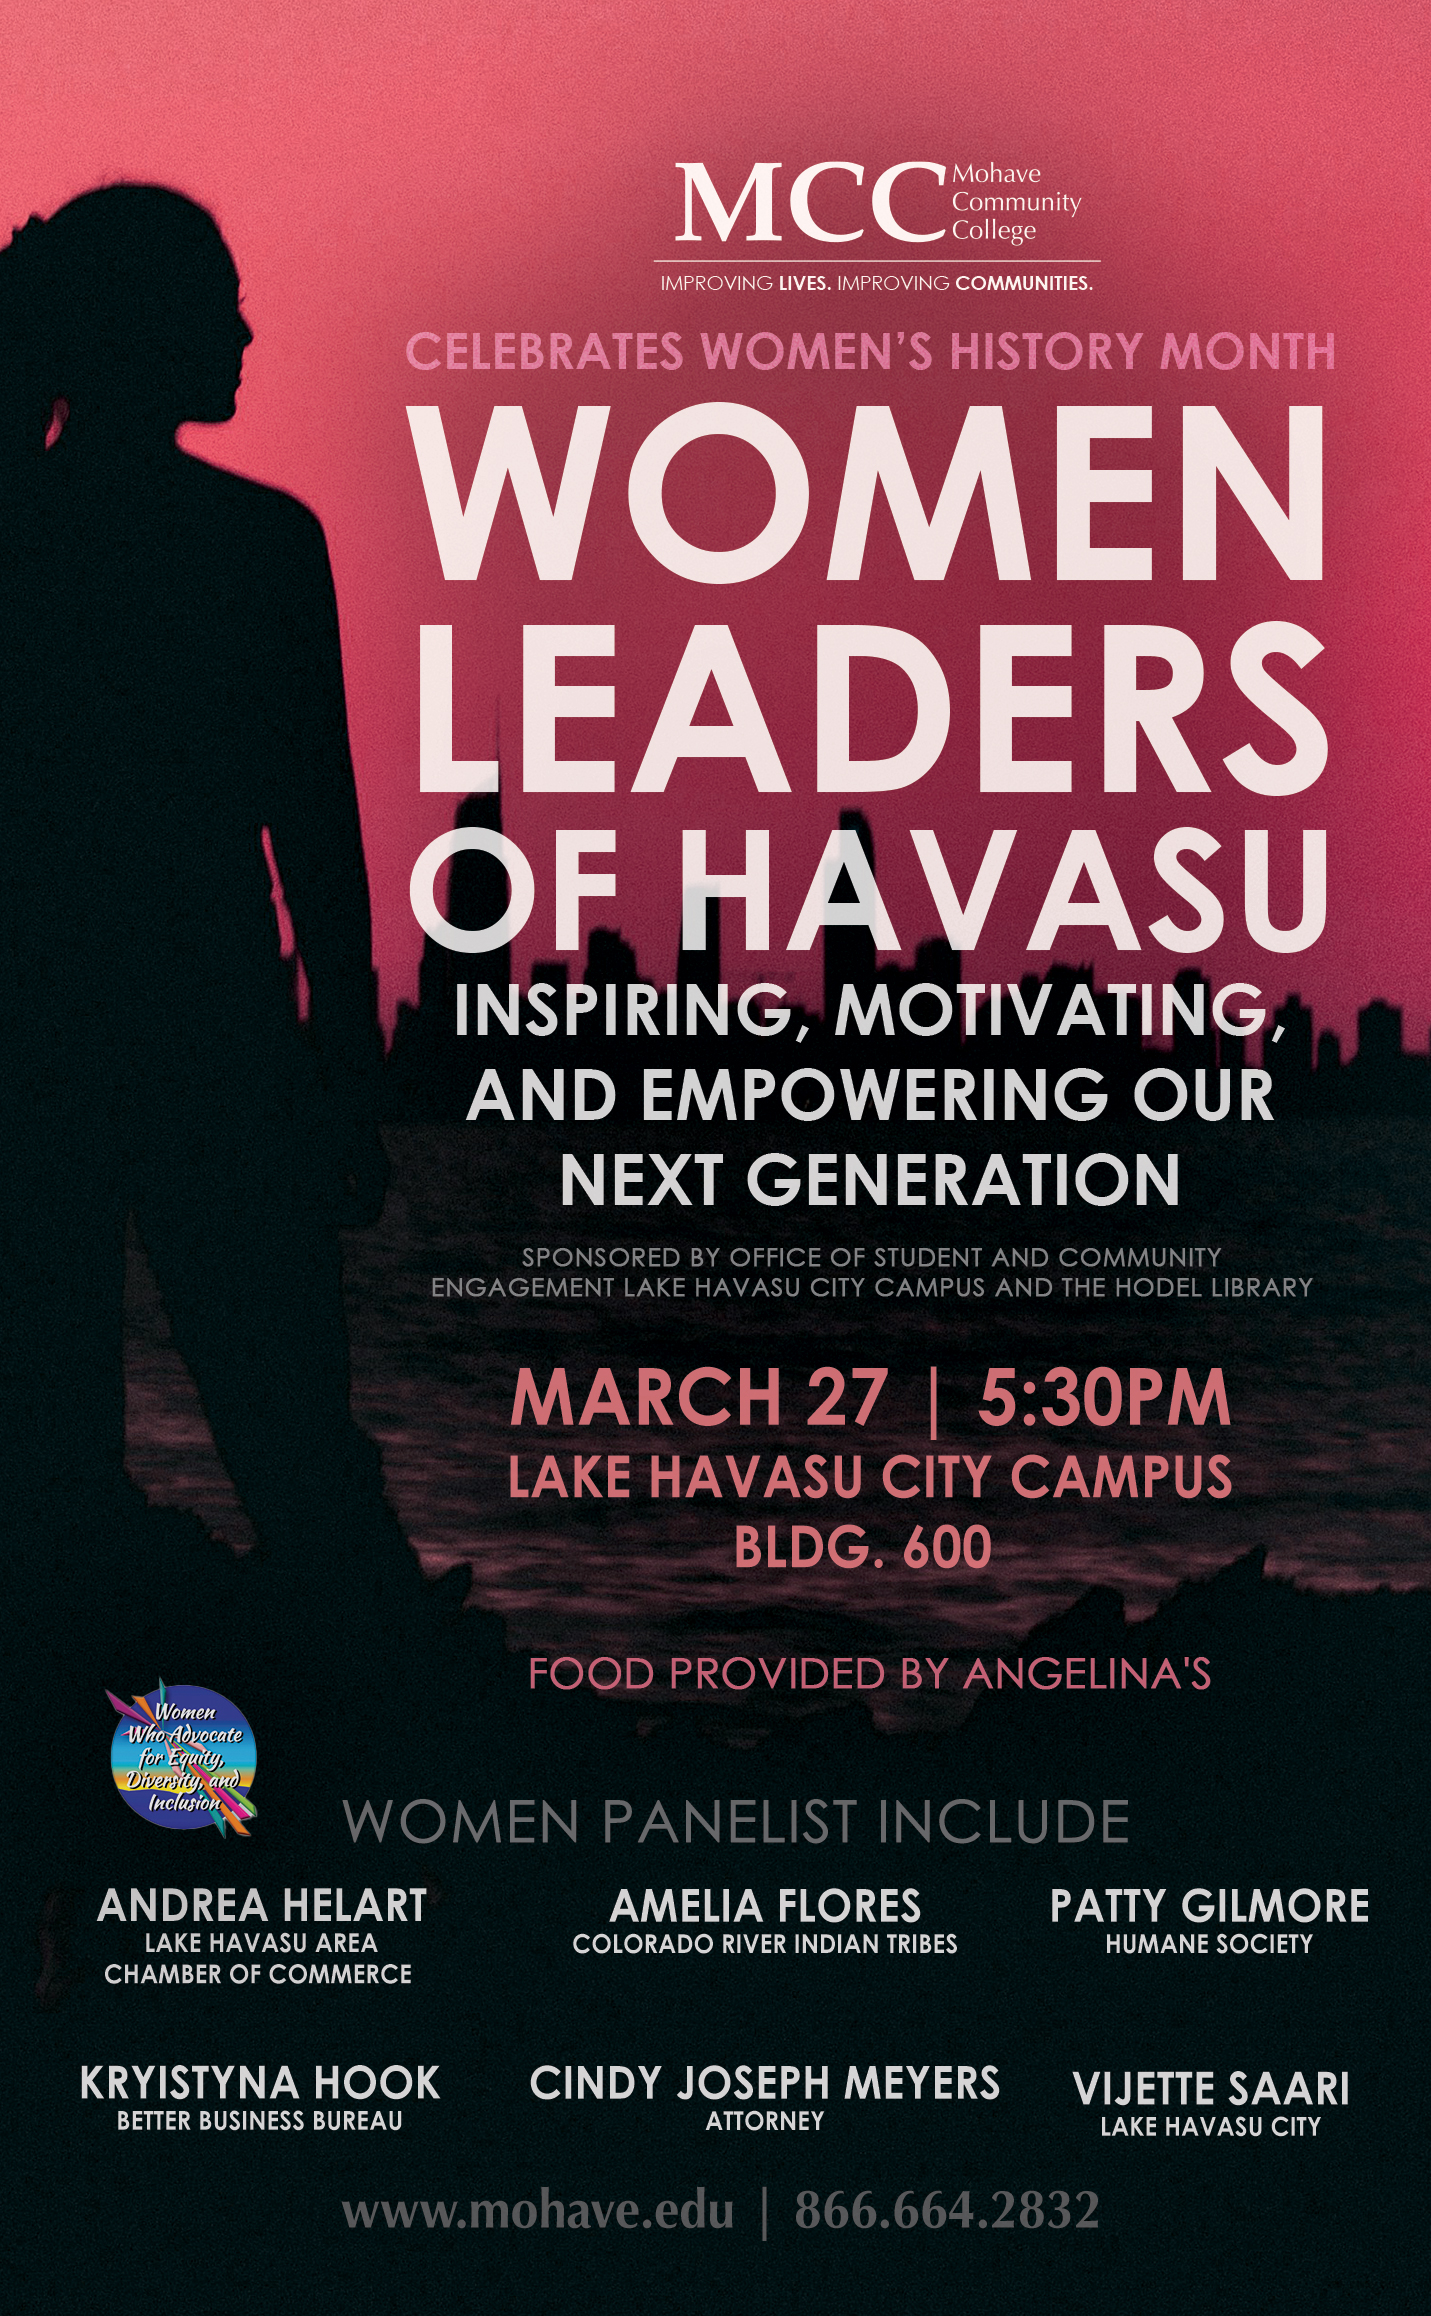 Women Leaders of Havasu: Inspiring, Motivating and Empowering Our Next Generation